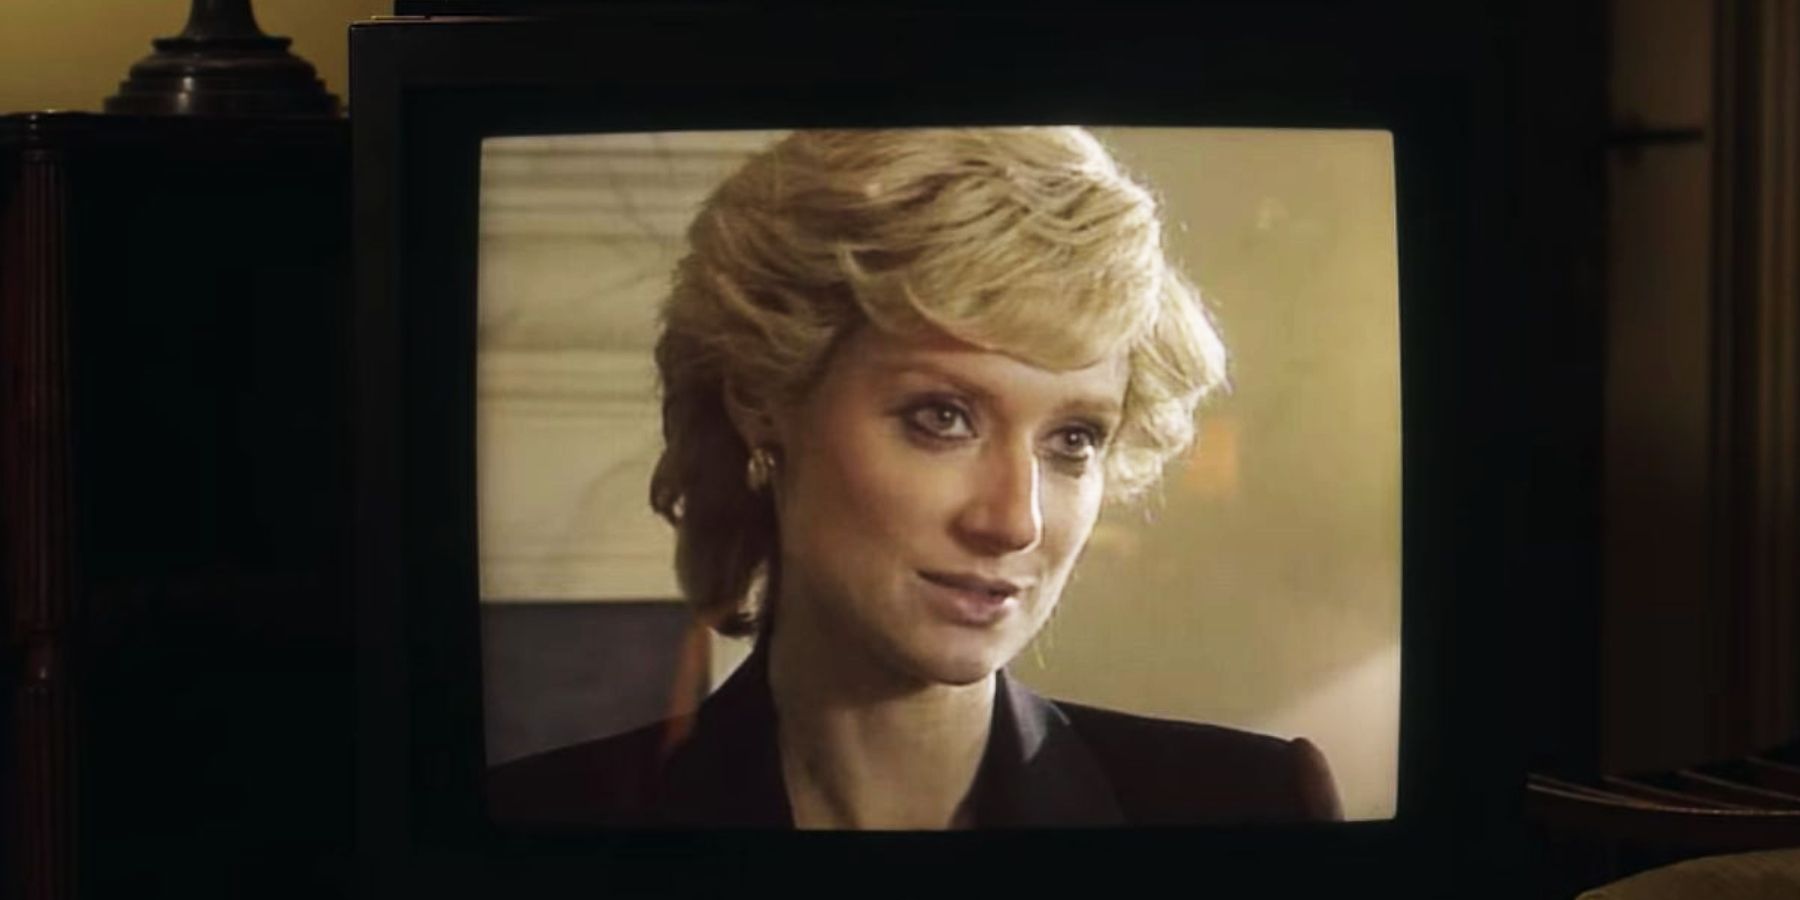 Diana being interviewed on Panorama in The Crown.